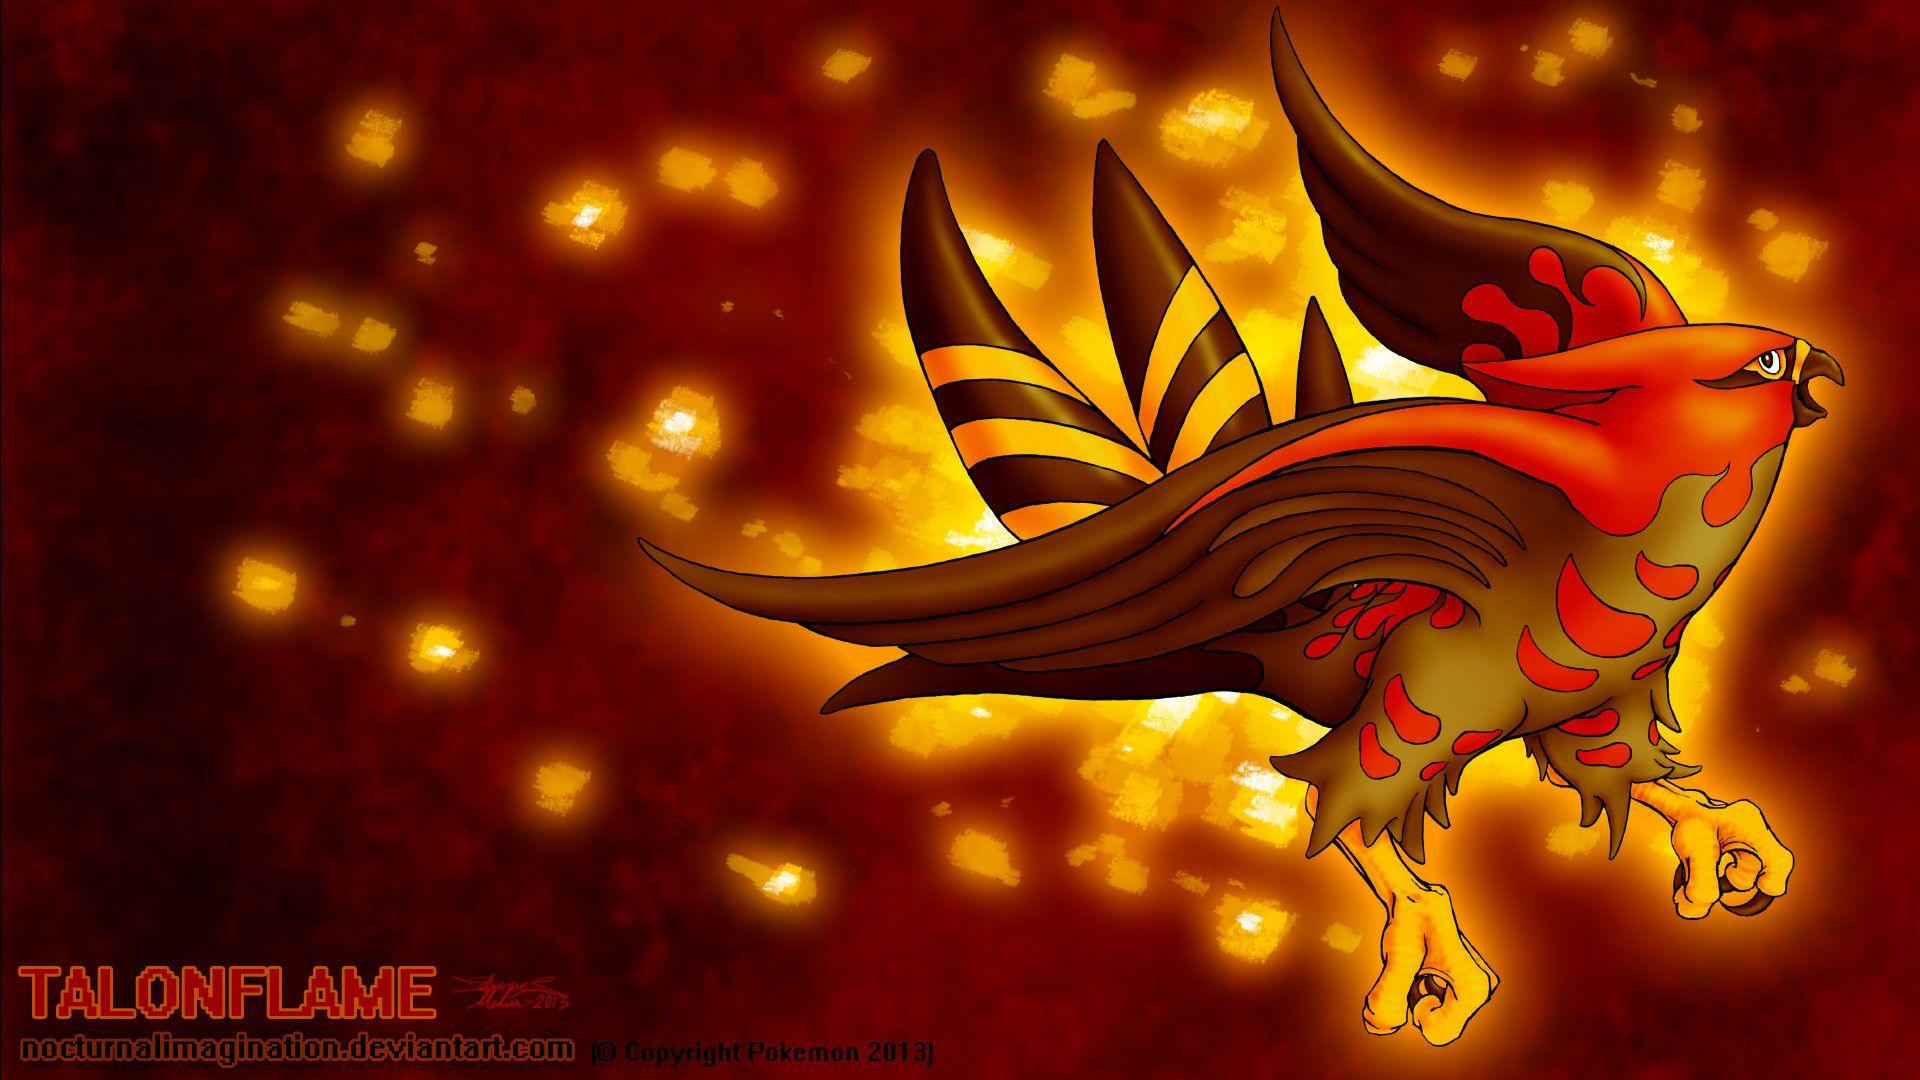 Talonflame Wallpaper background picture